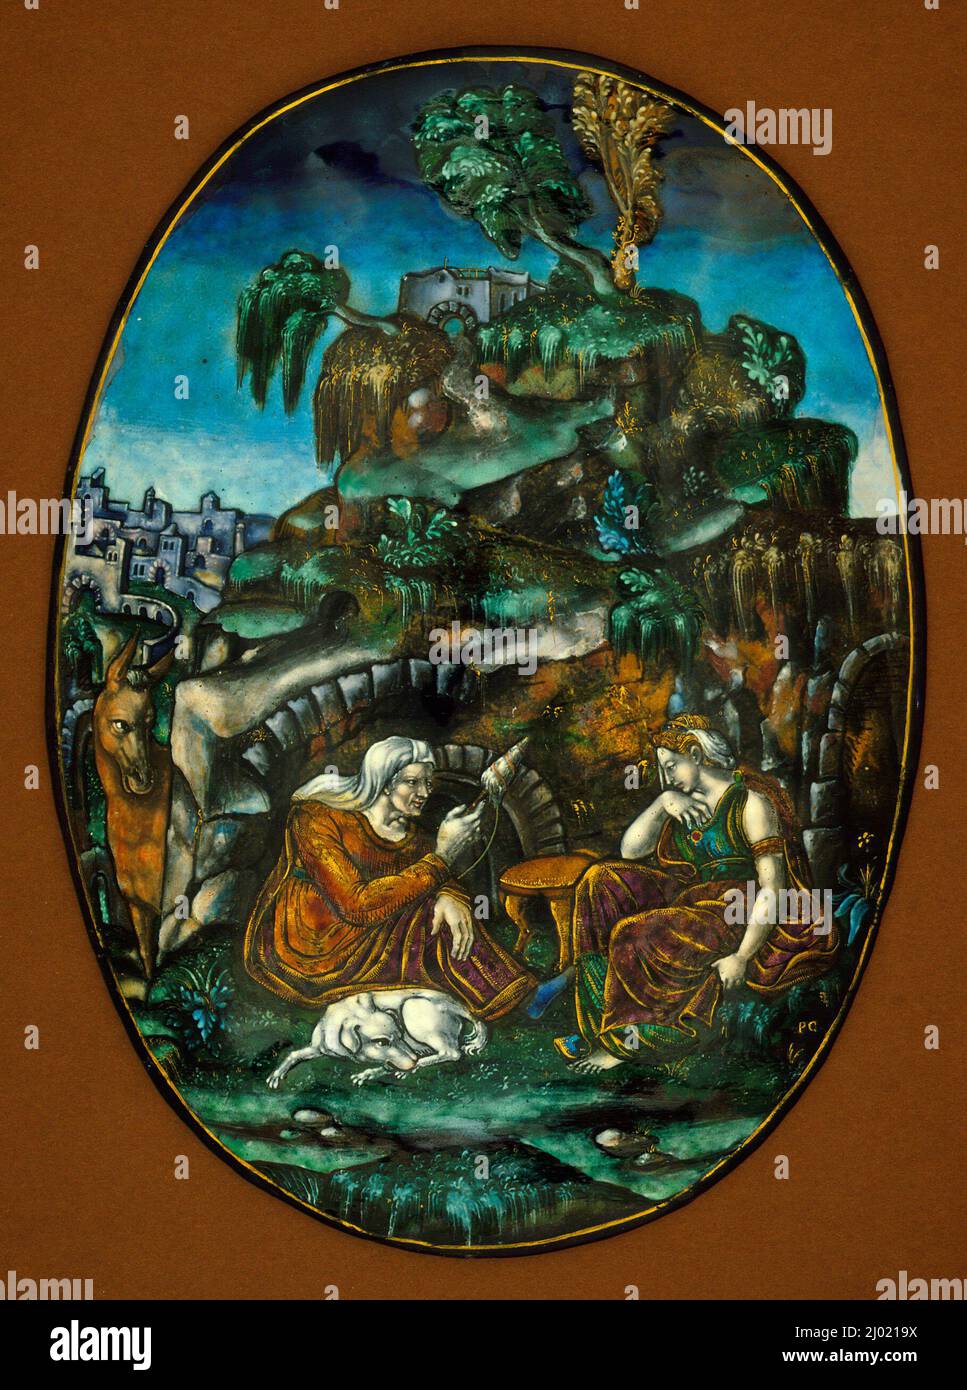 Plaque with Scene of an Old Woman Narrating the Story of Psyche. Pierre Courteys (France, Limoges, circa 1520-circa1586). France, Limoges, circa 1560. Furnishings; Accessories. Polychrome enamel, gold on copper with foil Stock Photo